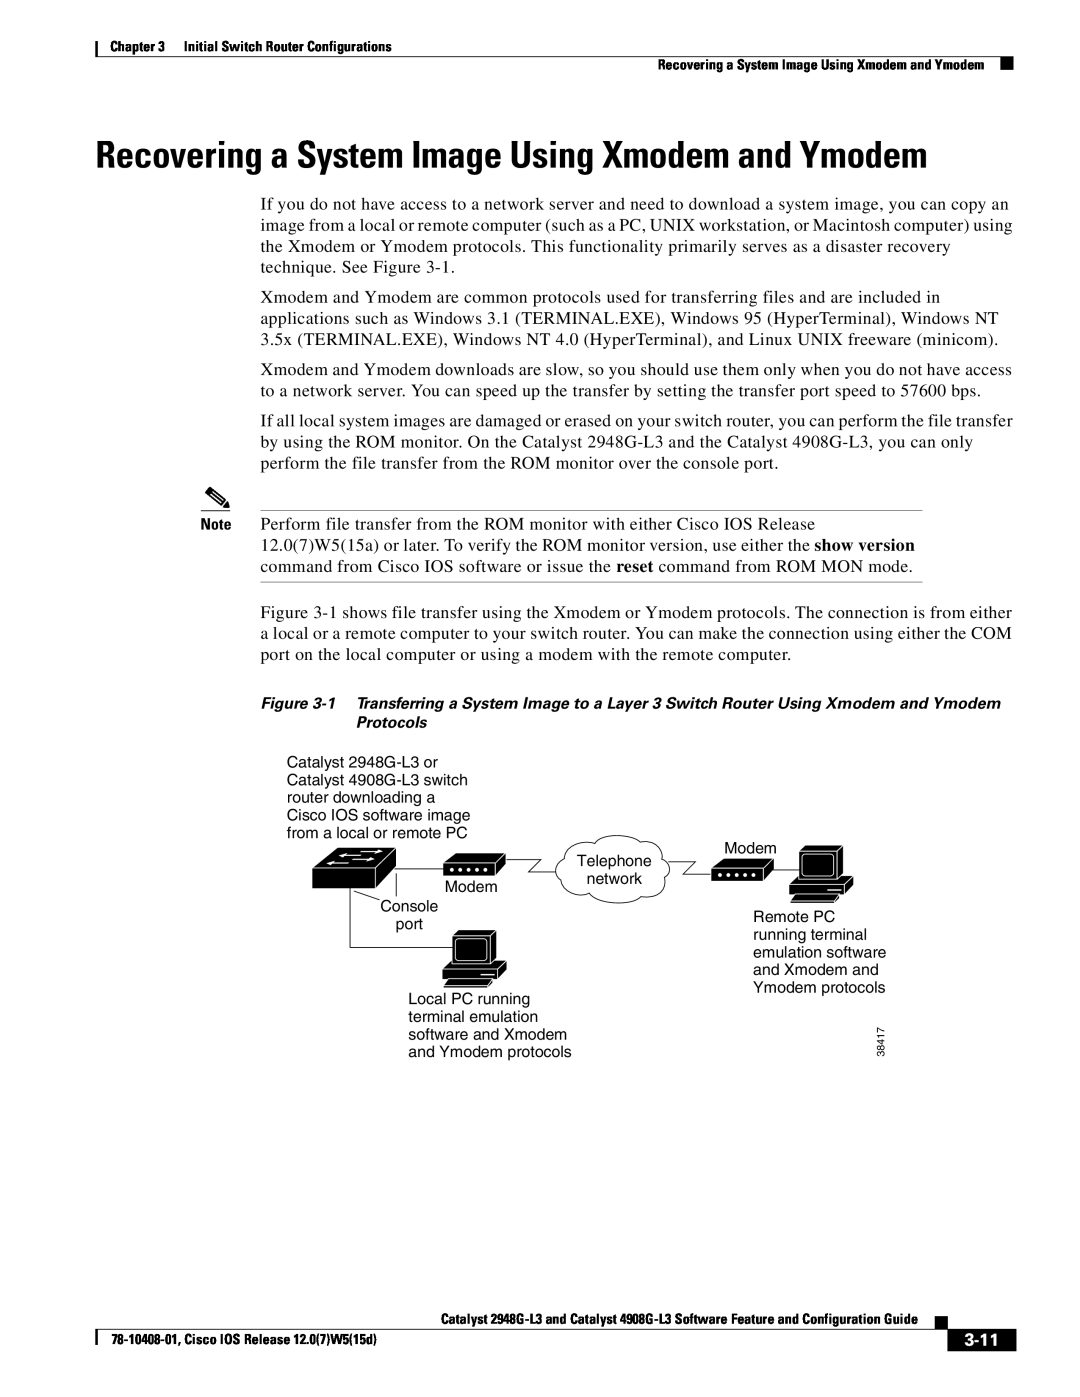 Cisco Systems manual 3-11, Recovering a System Image Using Xmodem and Ymodem 